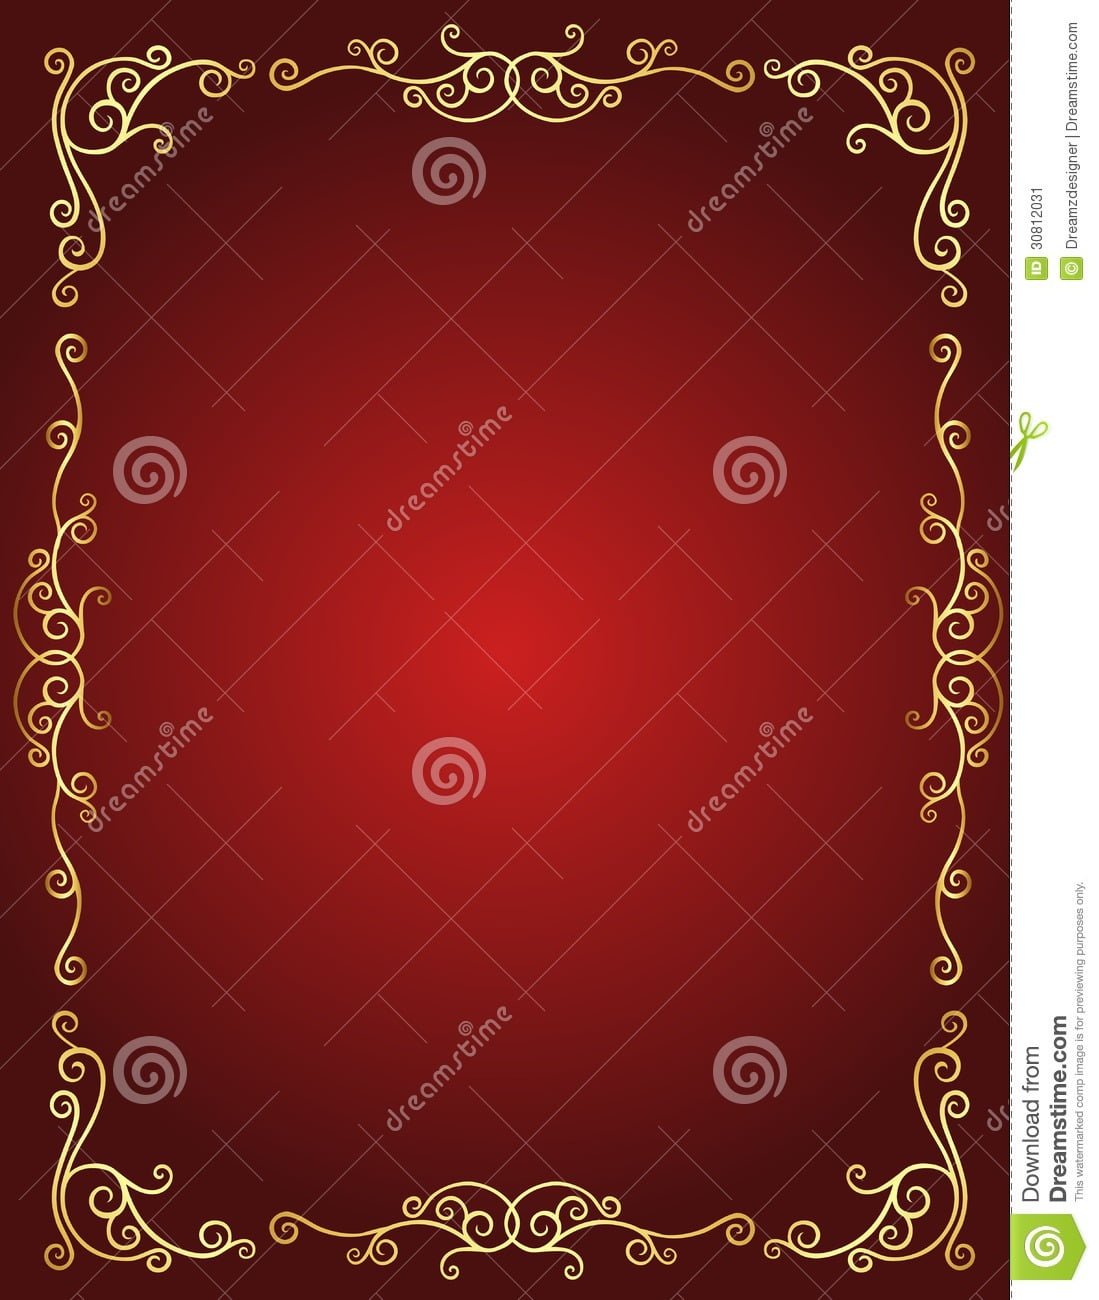 Wedding Invitation Border In Red And Gold Stock Vector